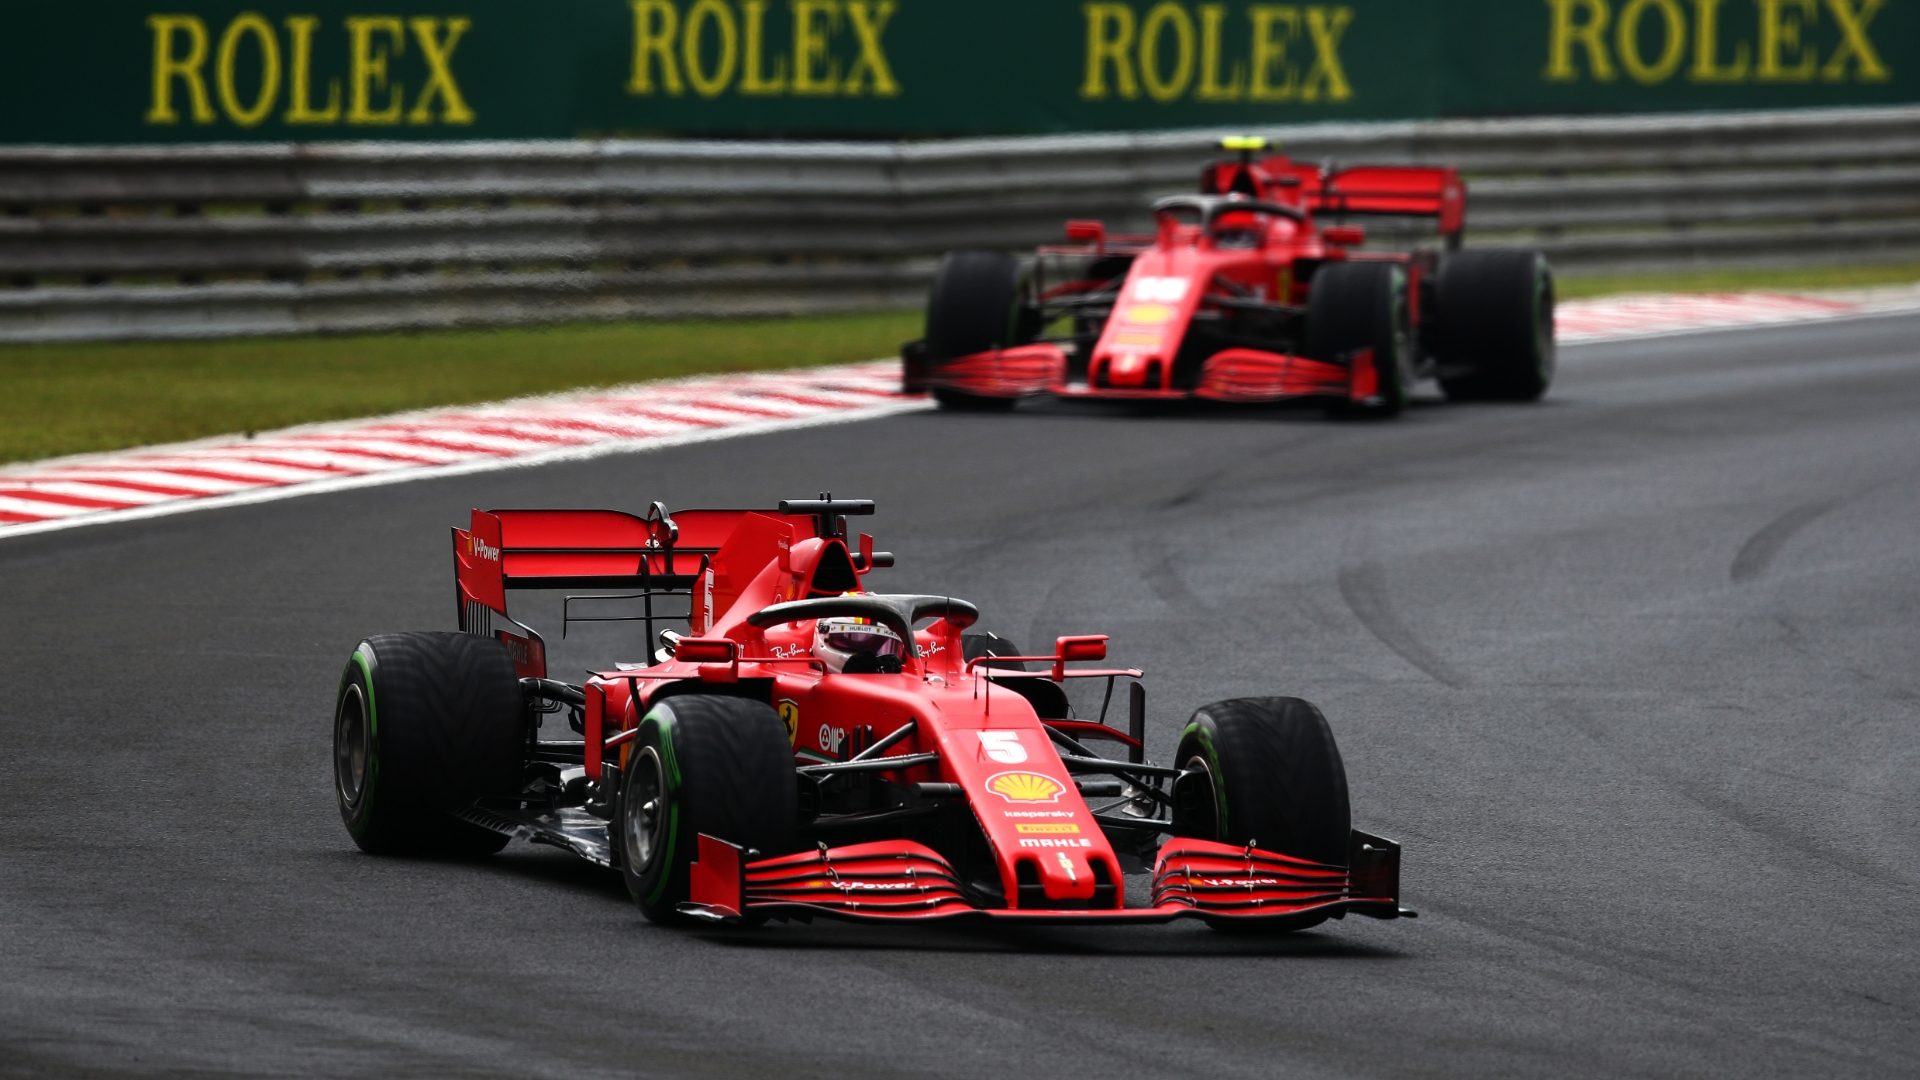 What can we expect from Ferrari at Monza?